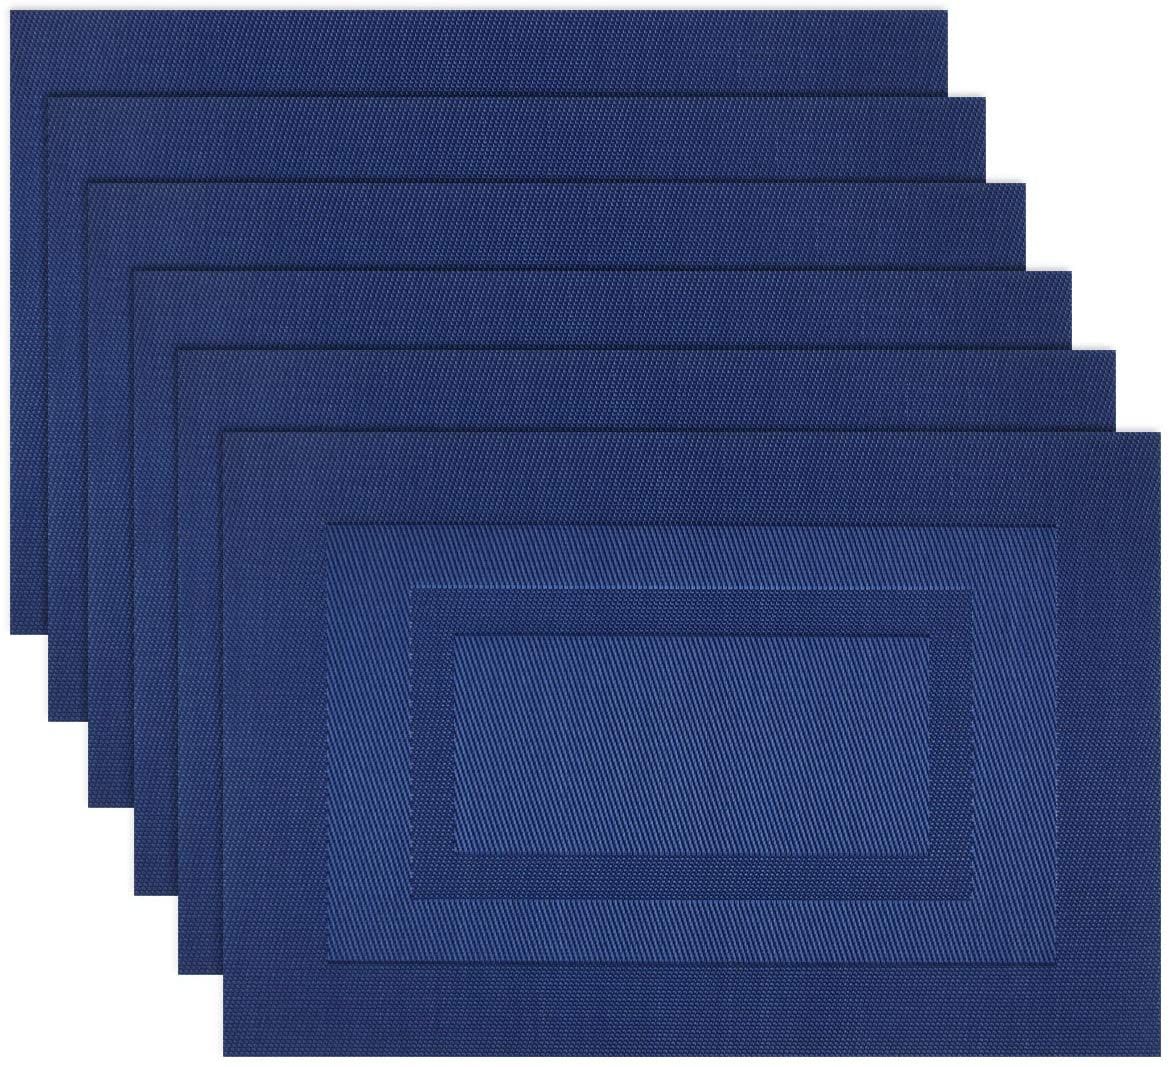 Placemats,Washable Woven Vinyl Placemats for Dining Table,Easy to Clean Plastic Placemats Set of ... | Walmart (US)